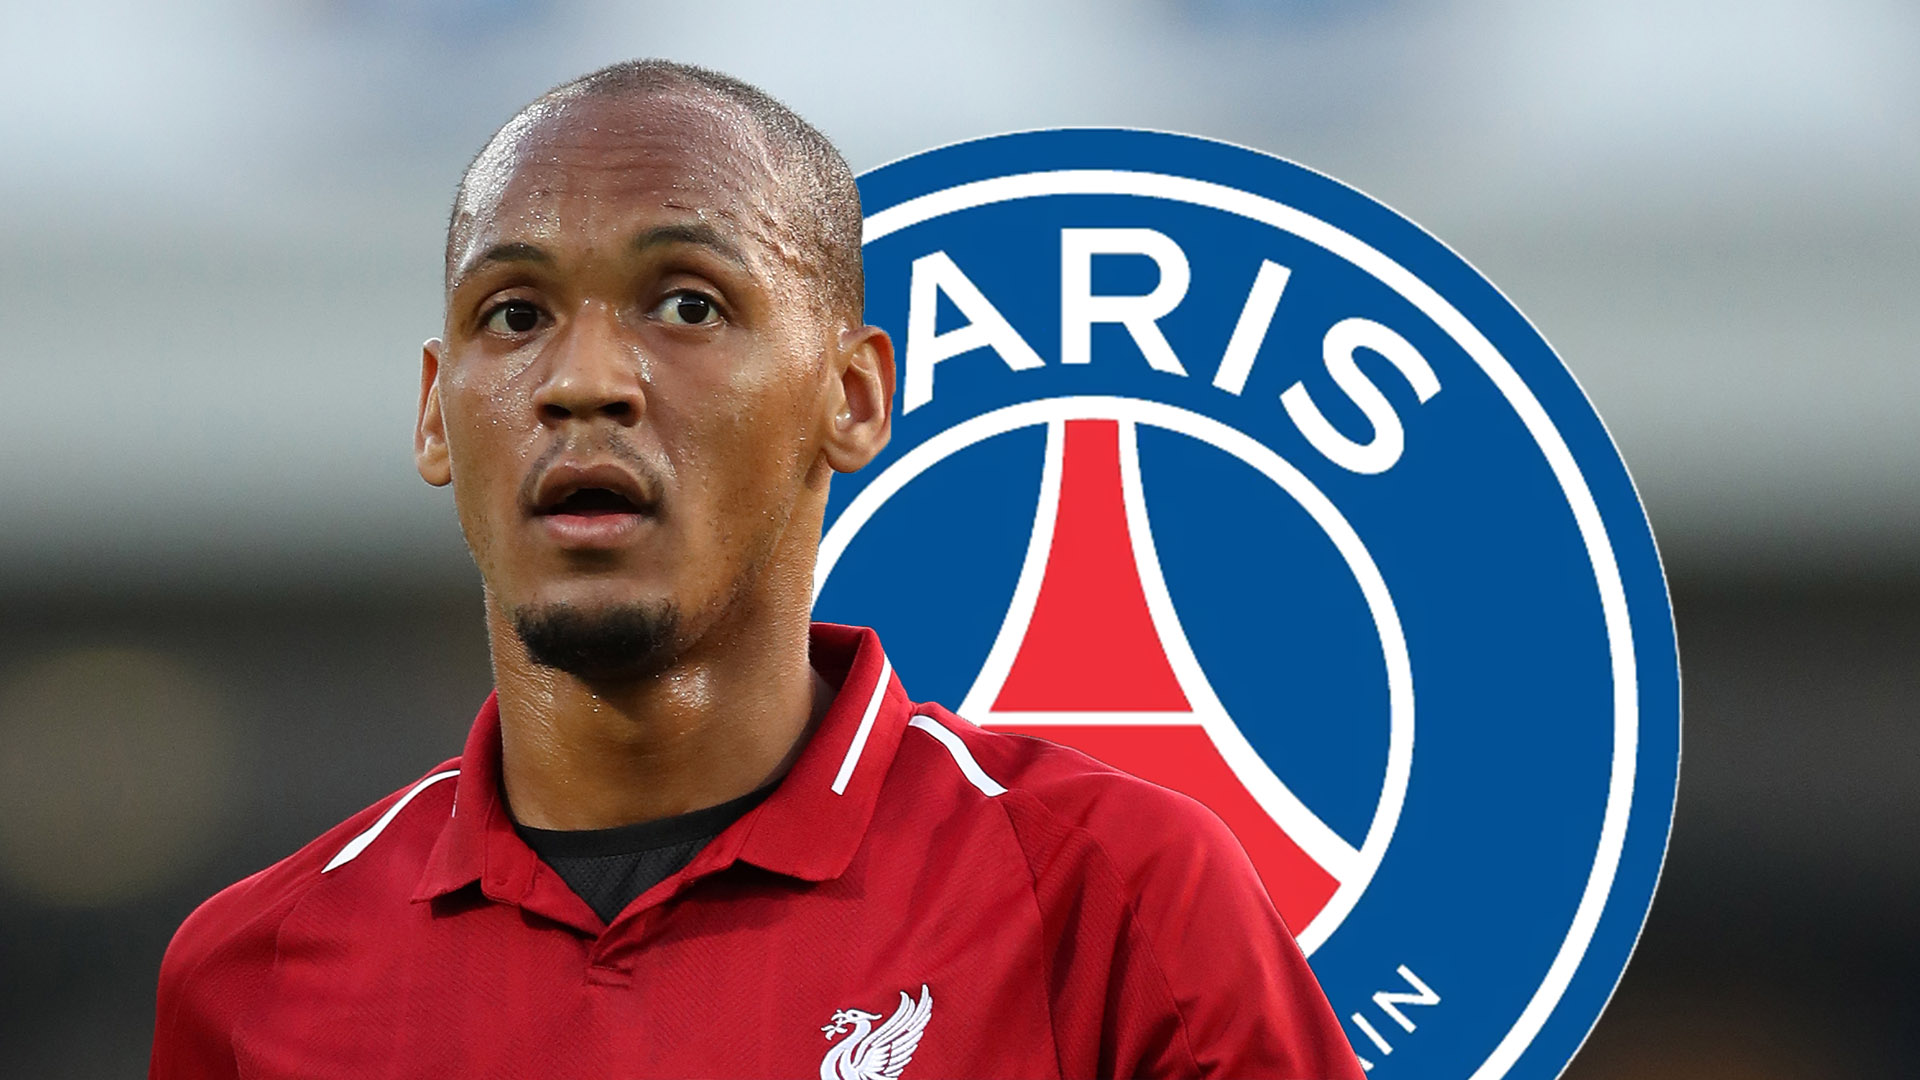 Image result for Fabinho accuses PSG of dirty transfer tactics and has no regrets at snubbing them for Liverpool